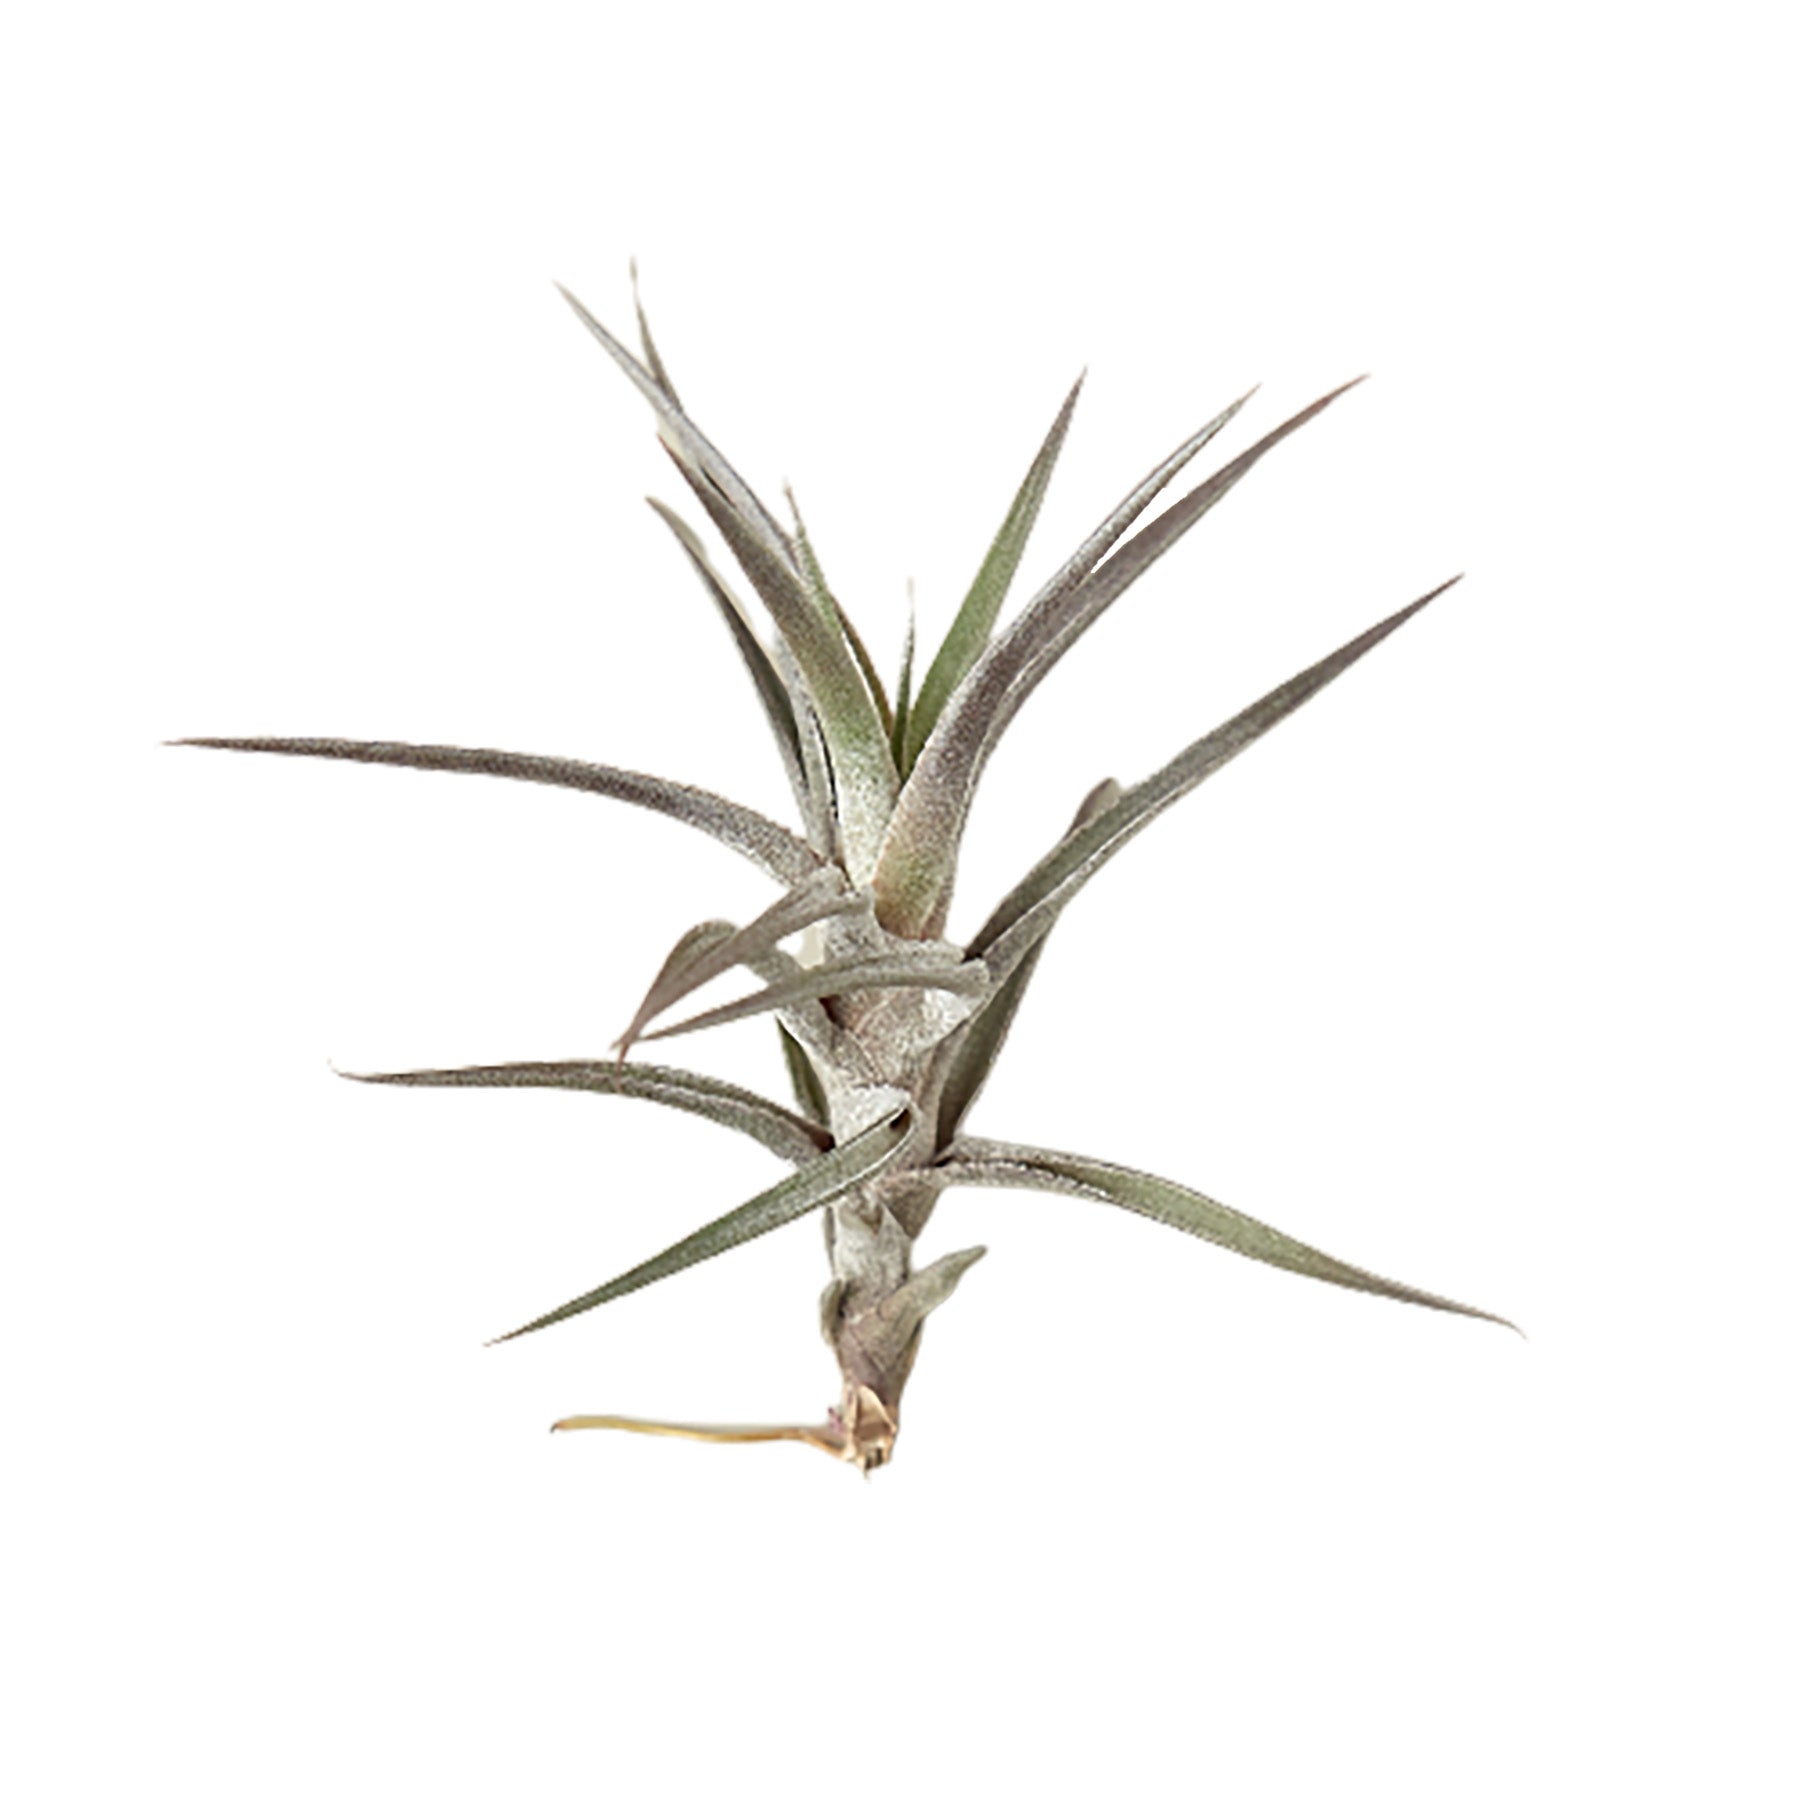 A small air plant on a white background from one of the best garden centers near me.